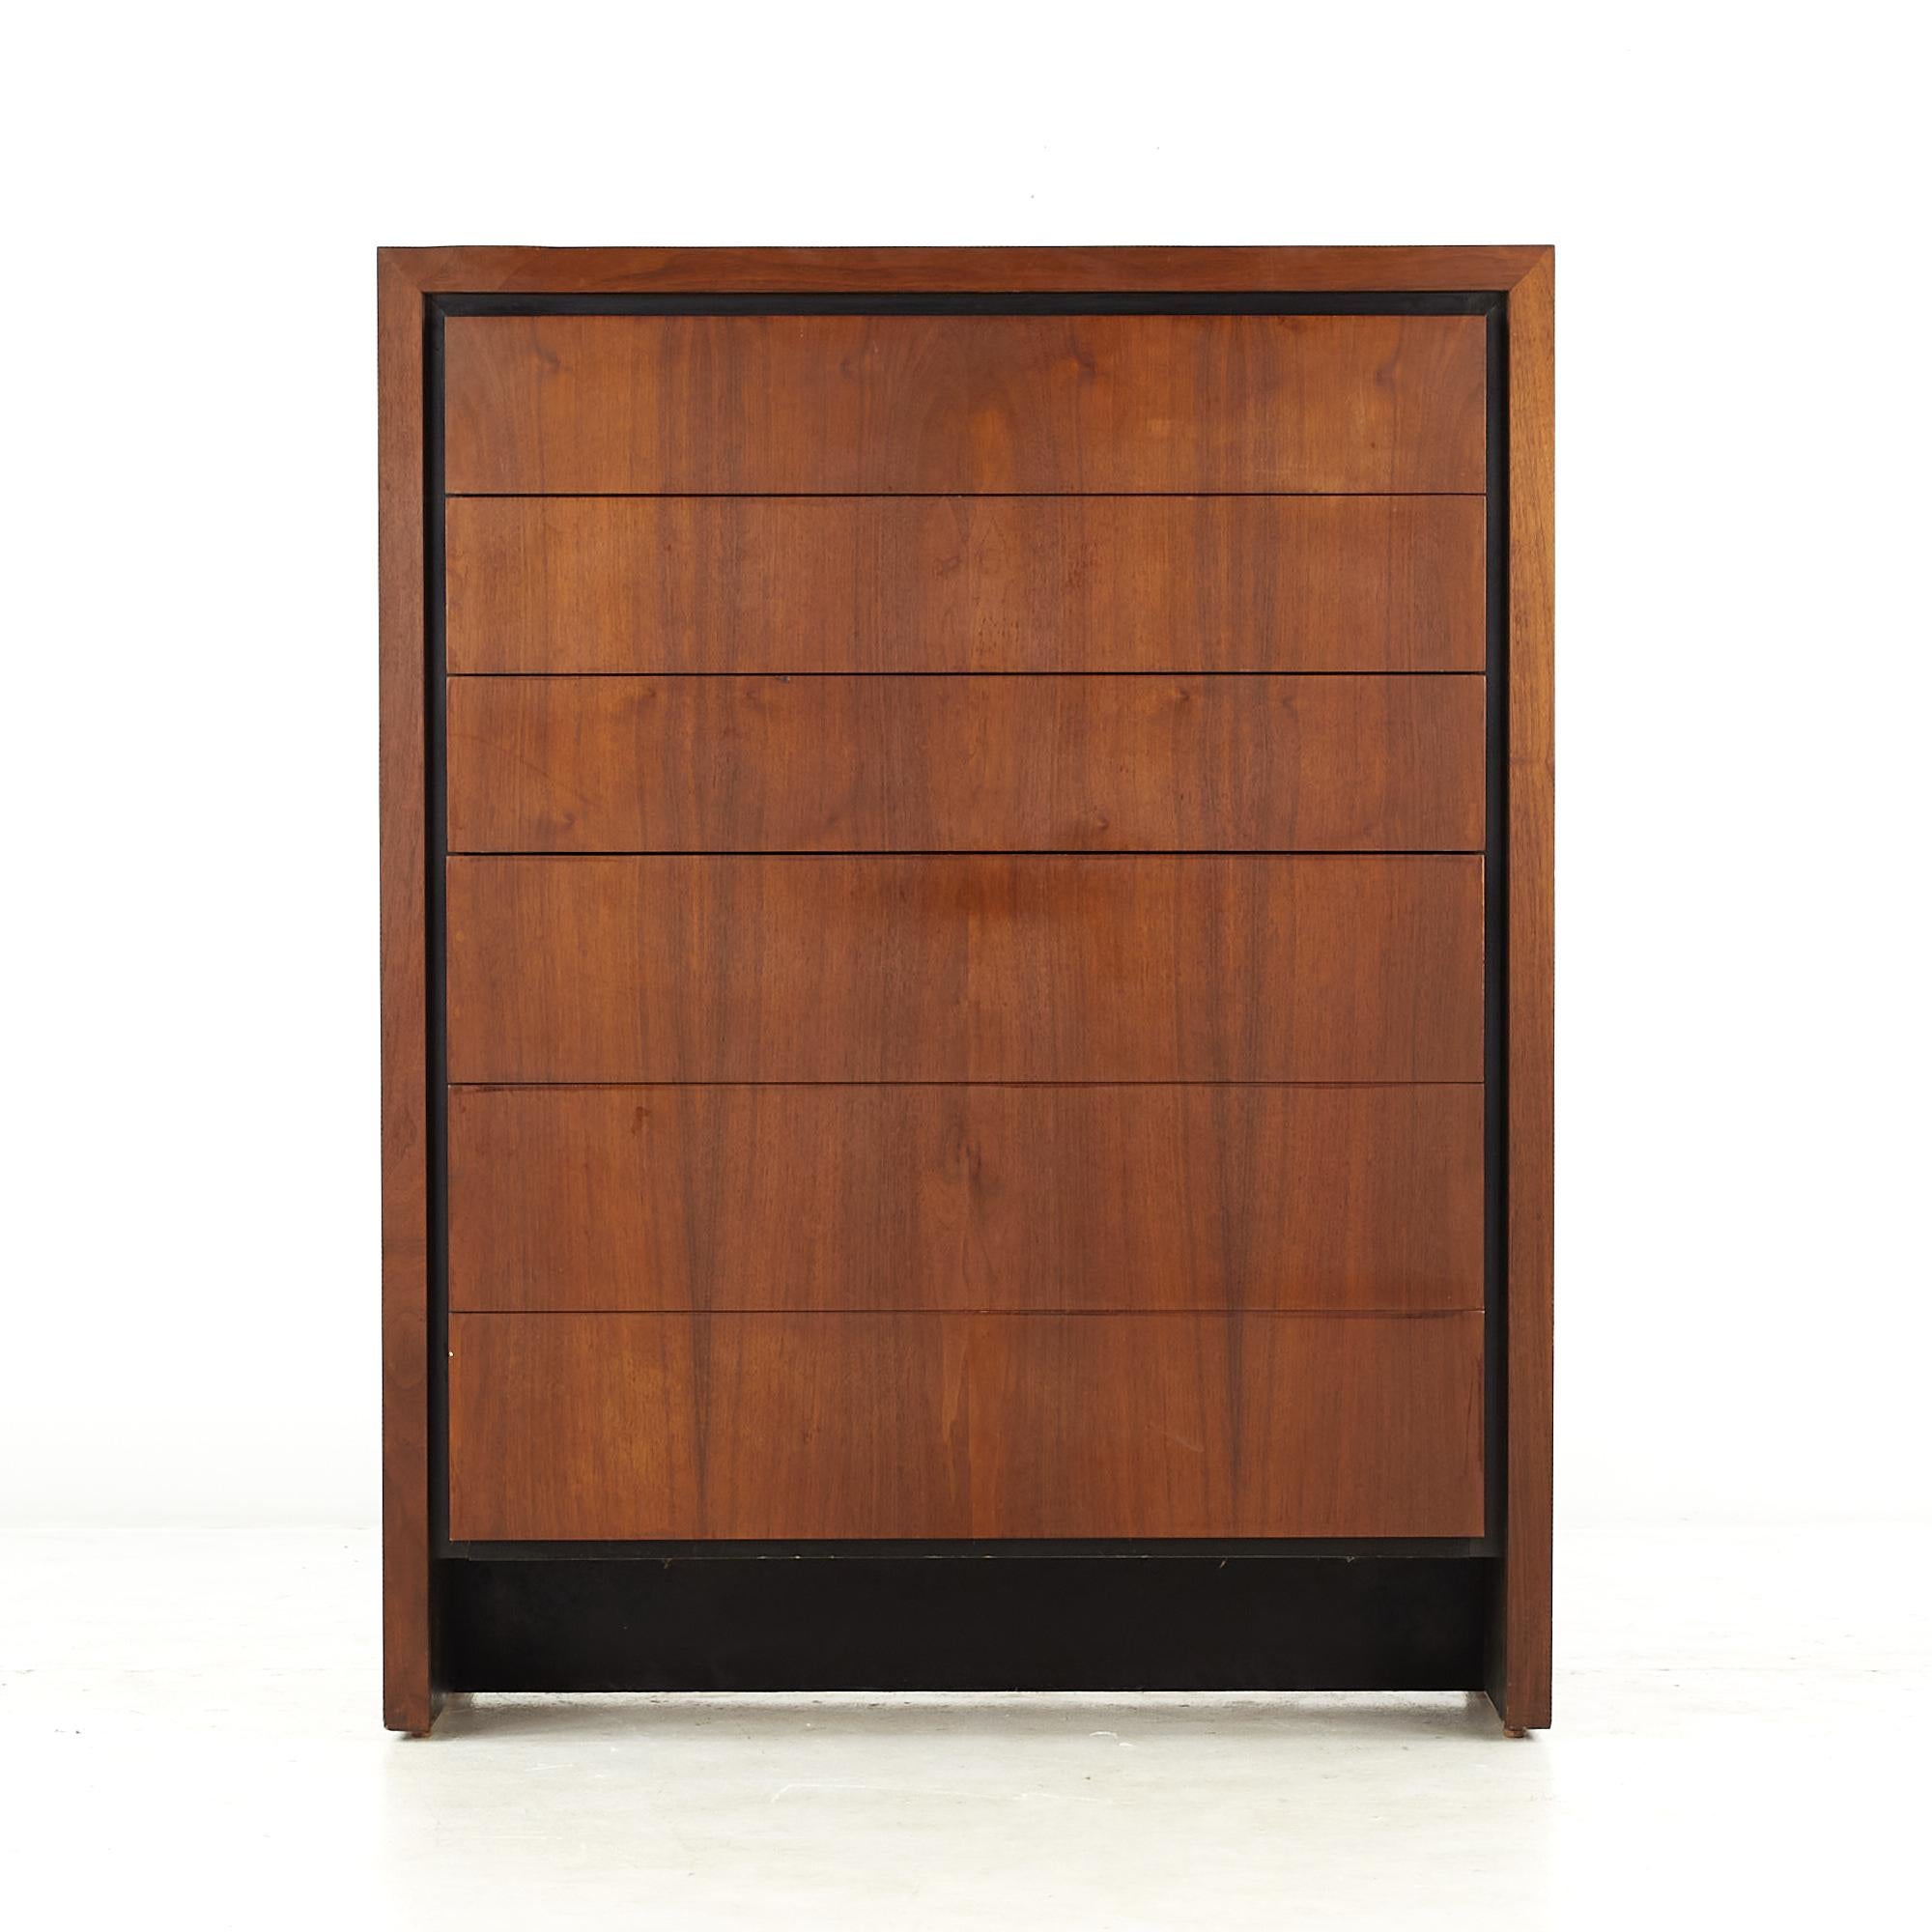 Dillingham Mid Century Bookmatched Highboy Dresser

This highboy measures: 38 wide x 19 deep x 48.5 inches high

All pieces of furniture can be had in what we call restored vintage condition. That means the piece is restored upon purchase so it’s